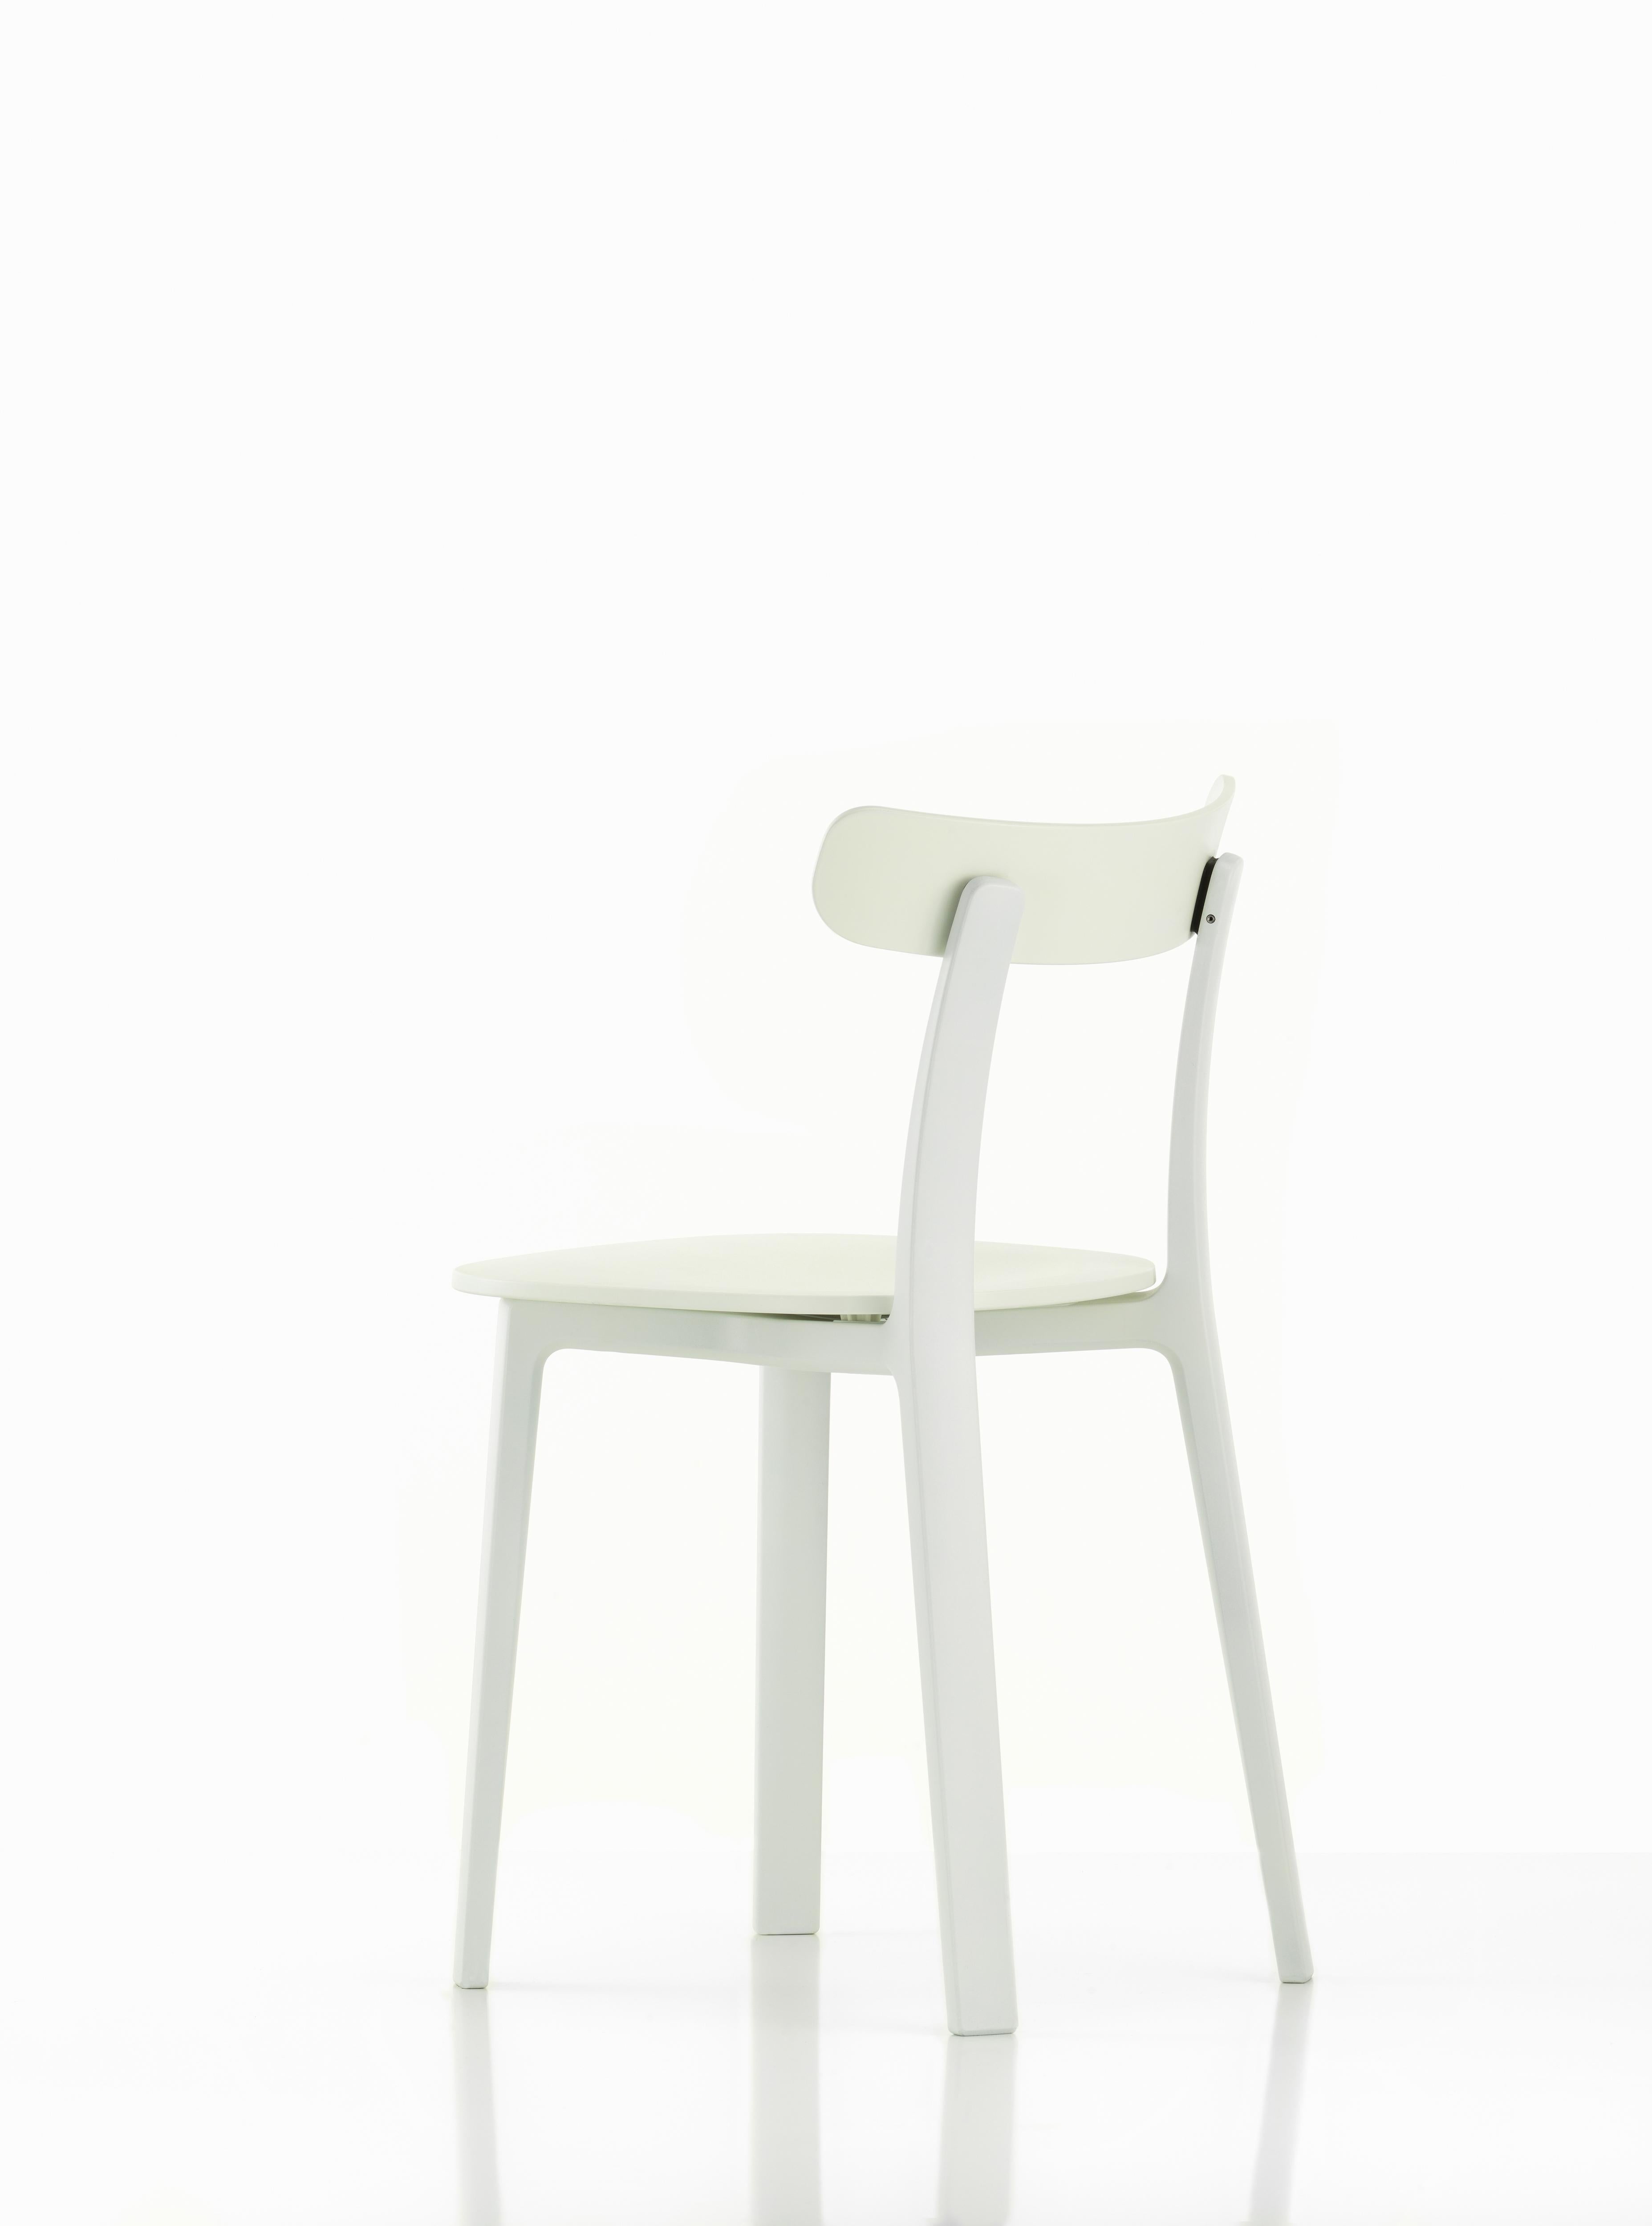 Swiss Vitra All Plastic Chair in White Two-Tone by Jasper Morrison For Sale